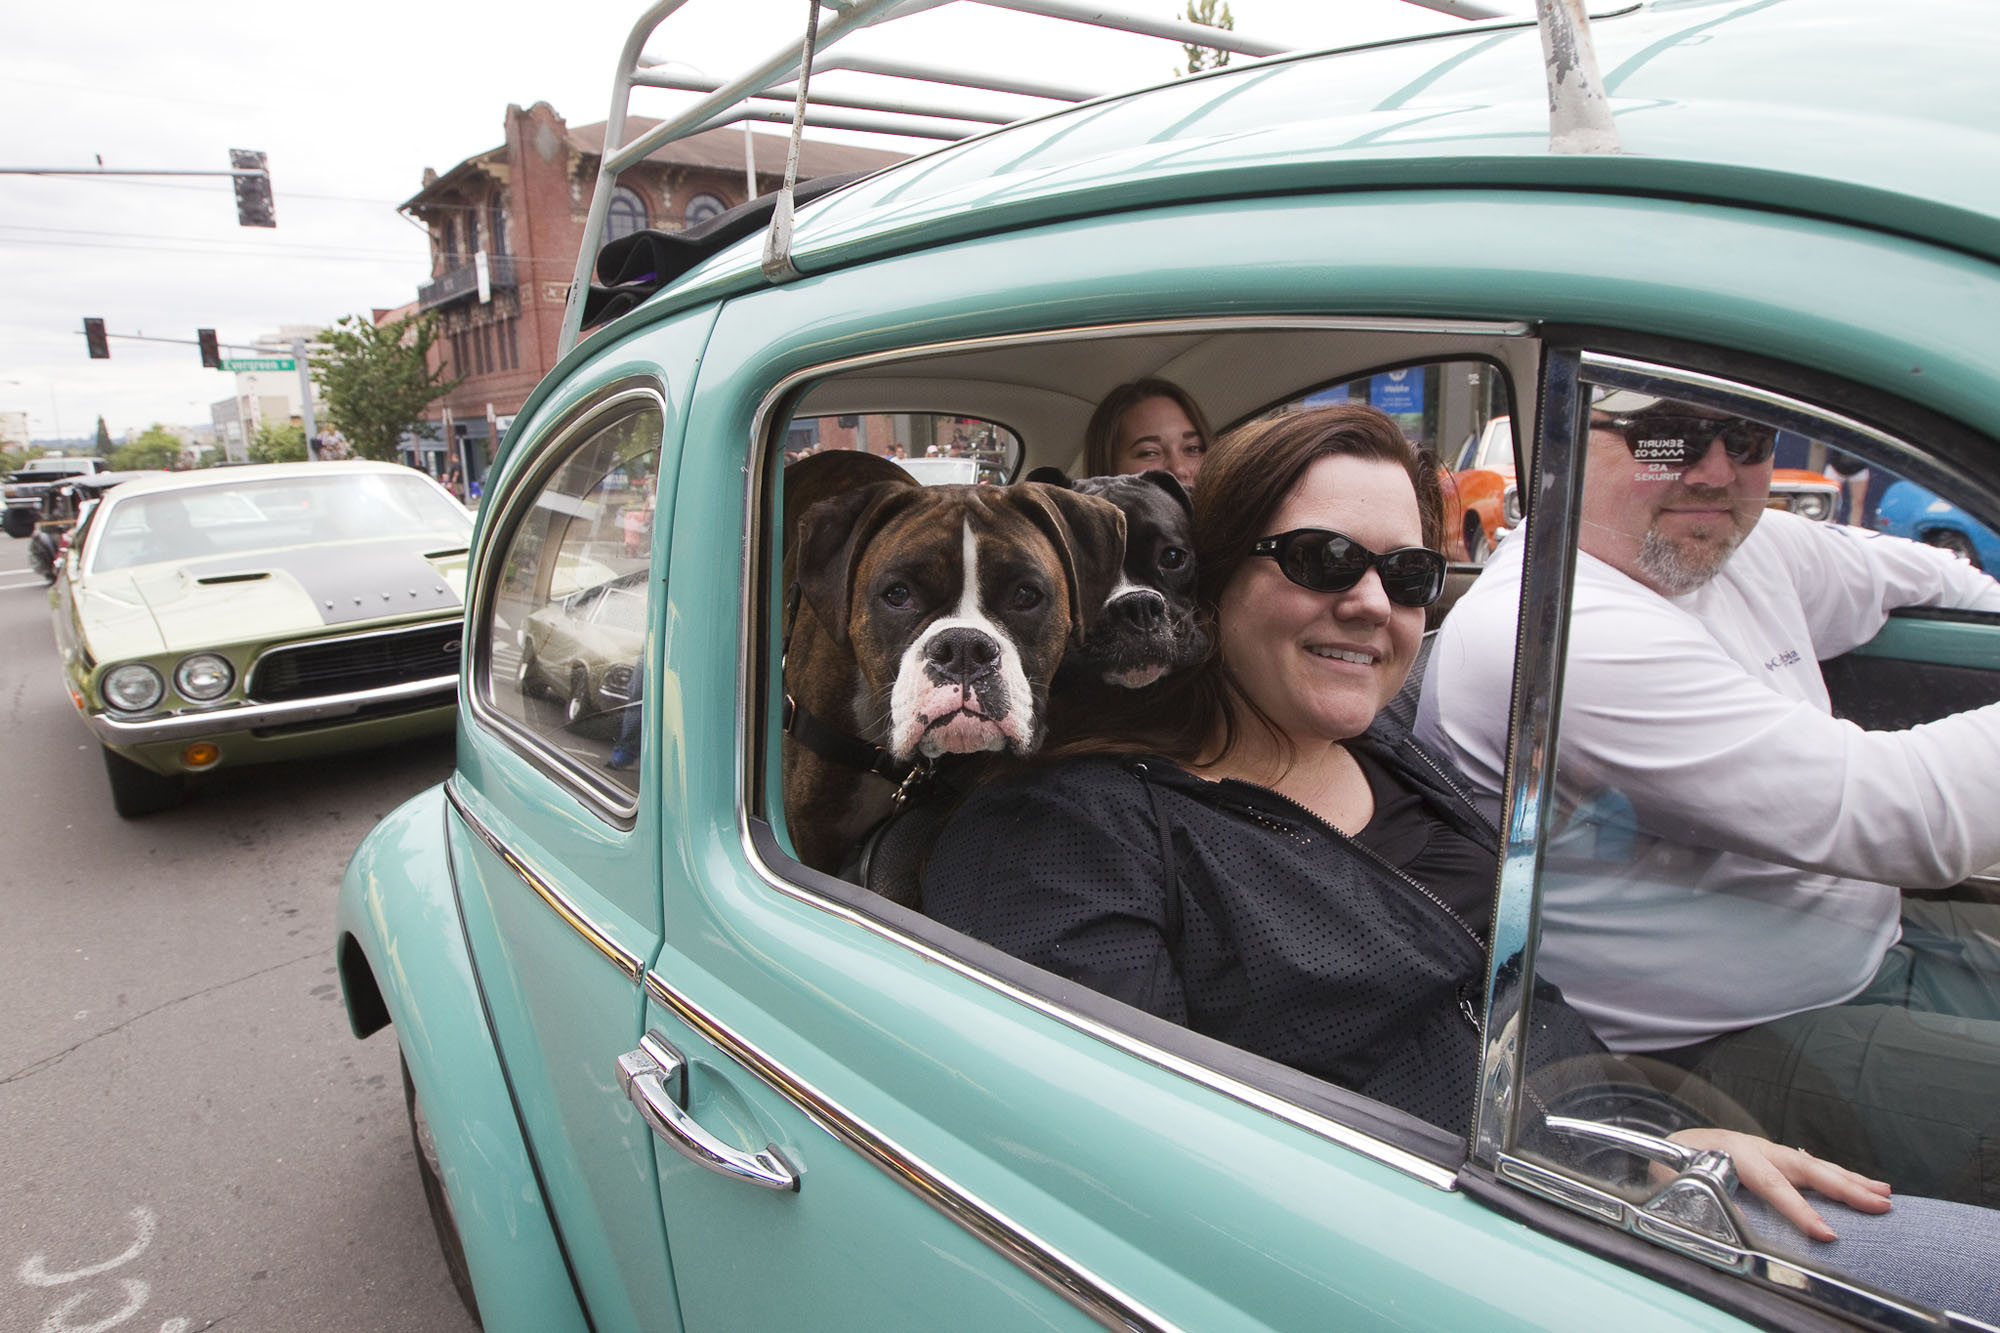 Susan Schrantz takes part in "Cruisin' the Gut" with her family in a VW Bug on Main Street in downtown Vancouver in 2016.